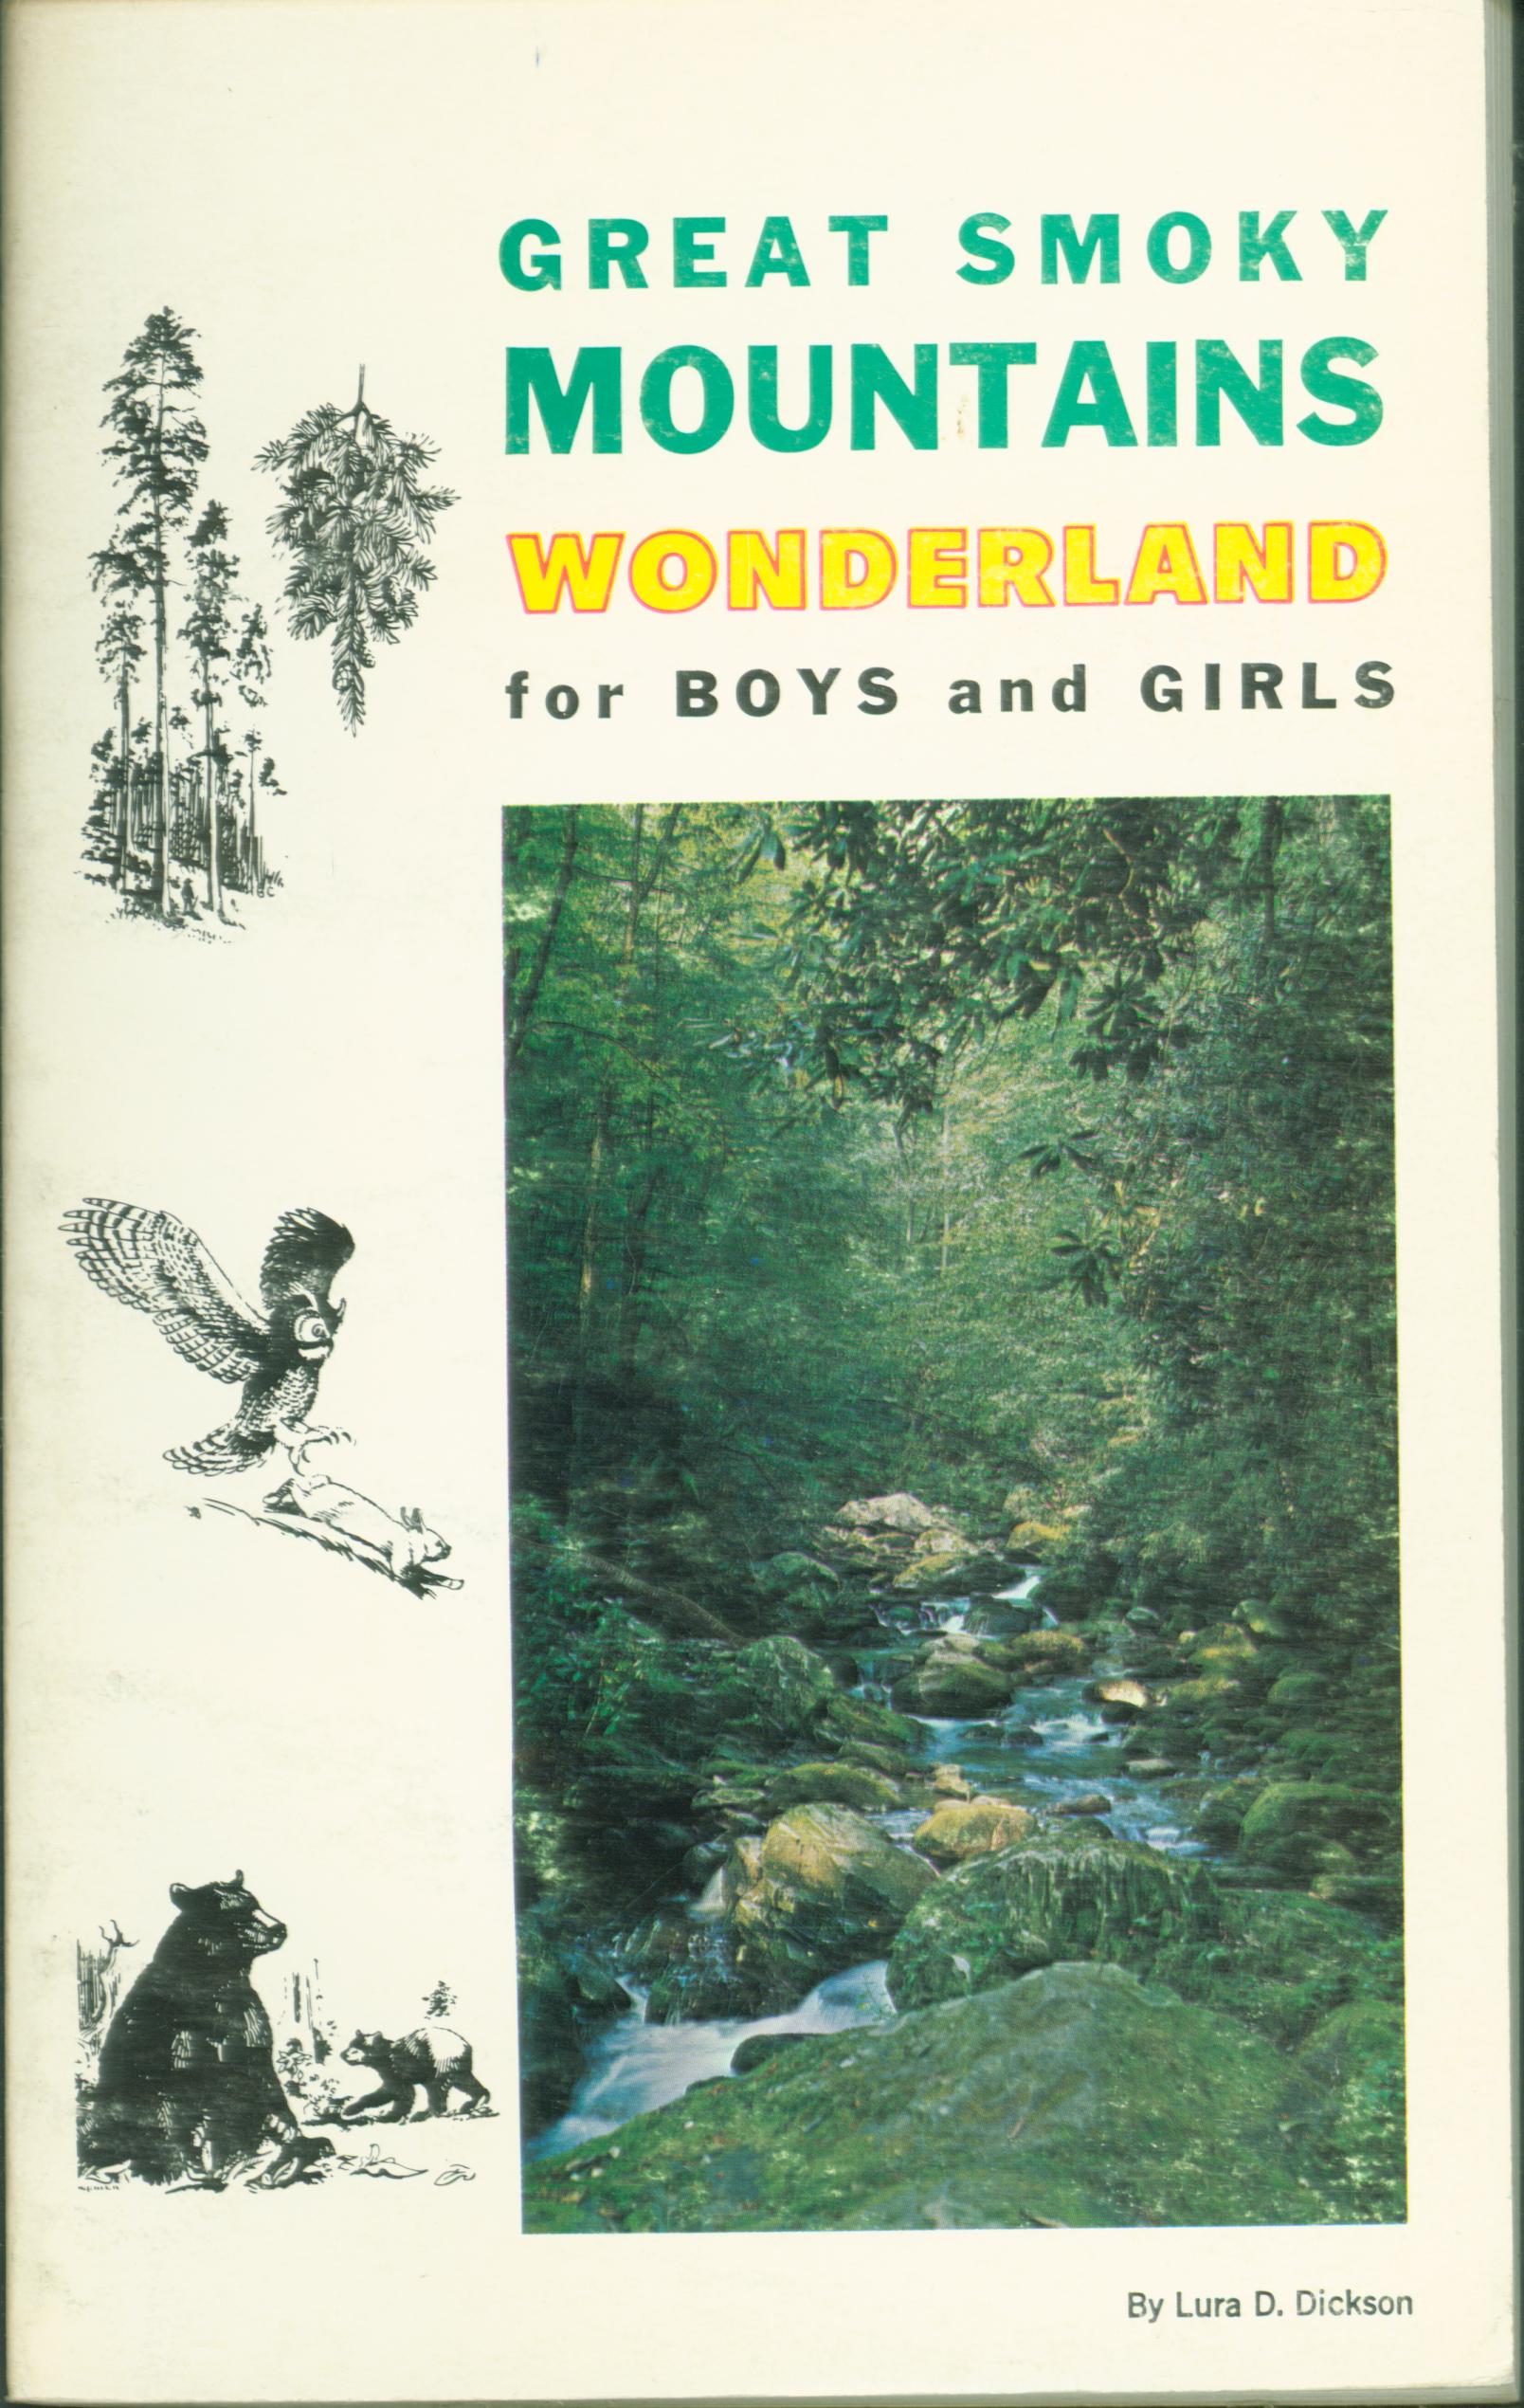 GREAT SMOKY MOUNTAINS: wonderland for boys and girls.